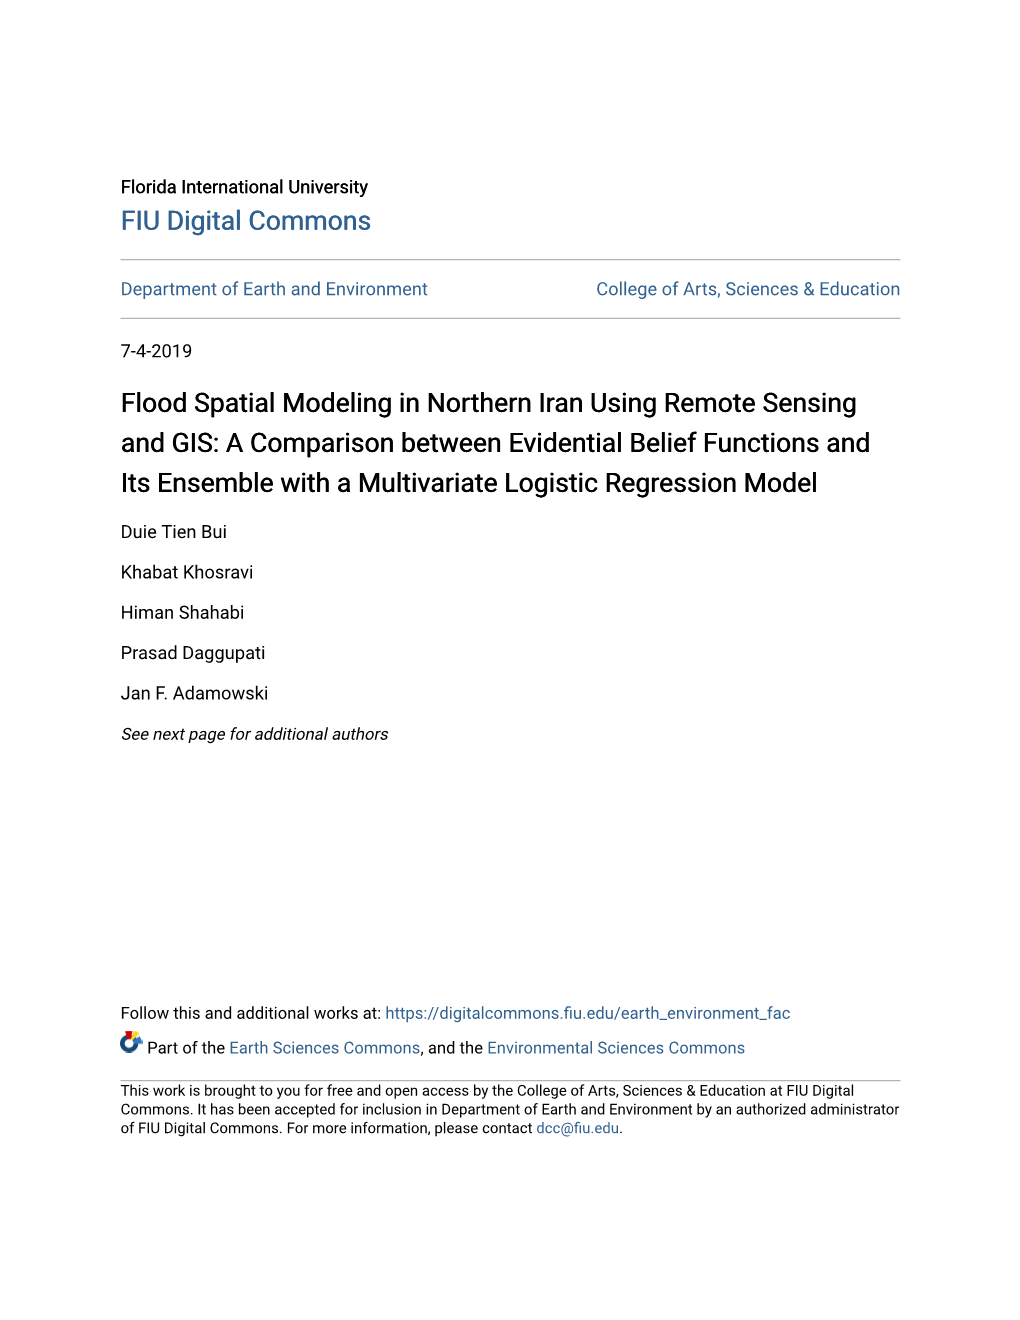 Flood Spatial Modeling in Northern Iran Using Remote Sensing And